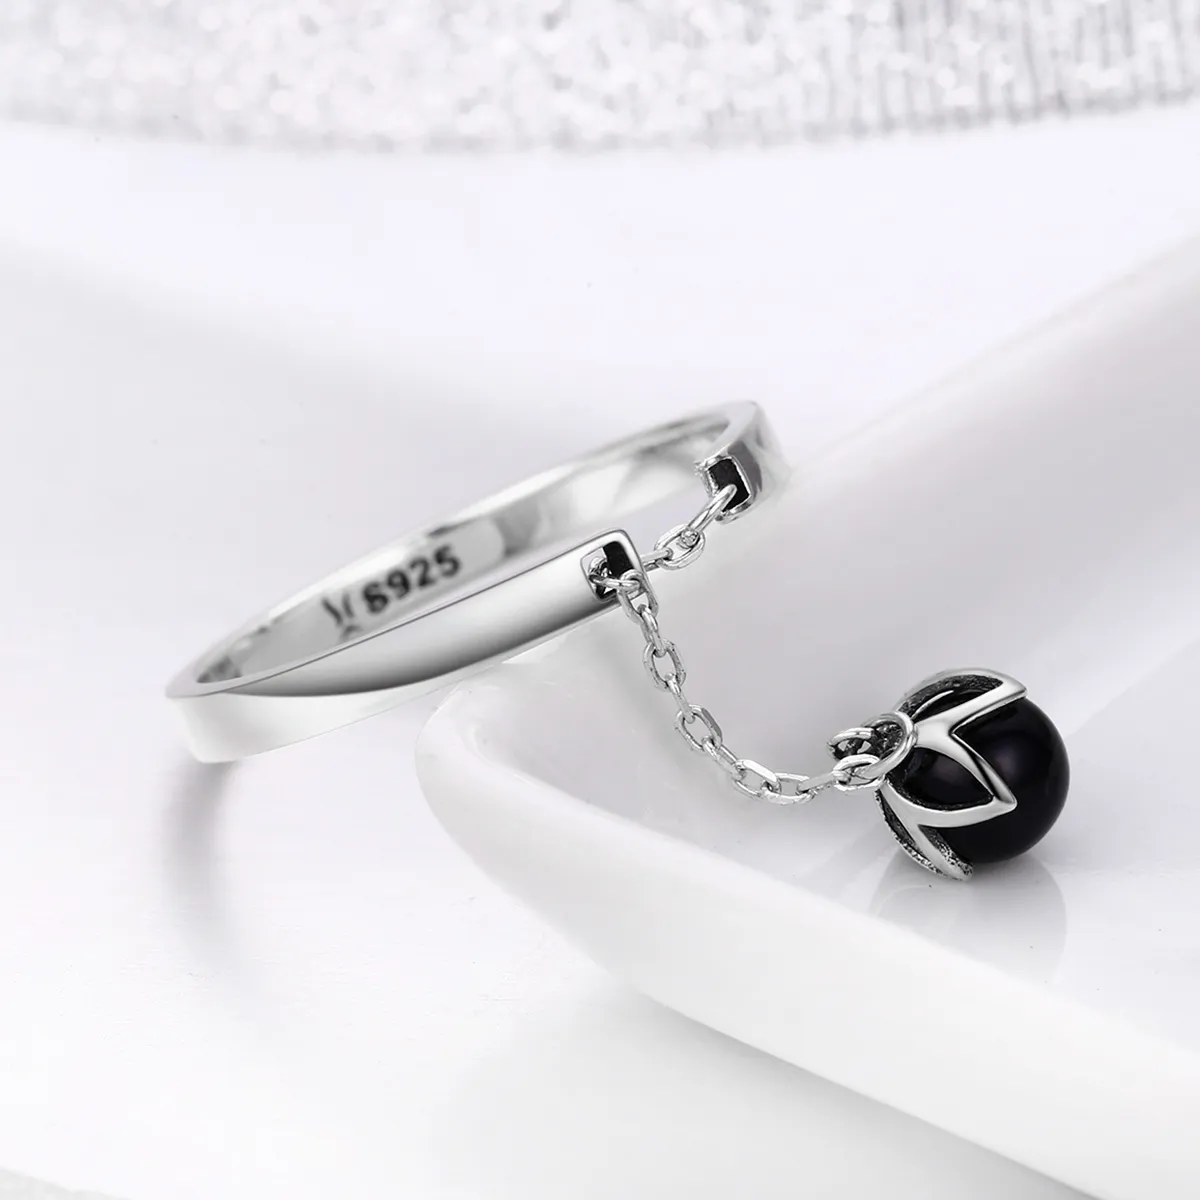 Pandora Style Silver Tears of Flowers Adjustable Ring - SCR314